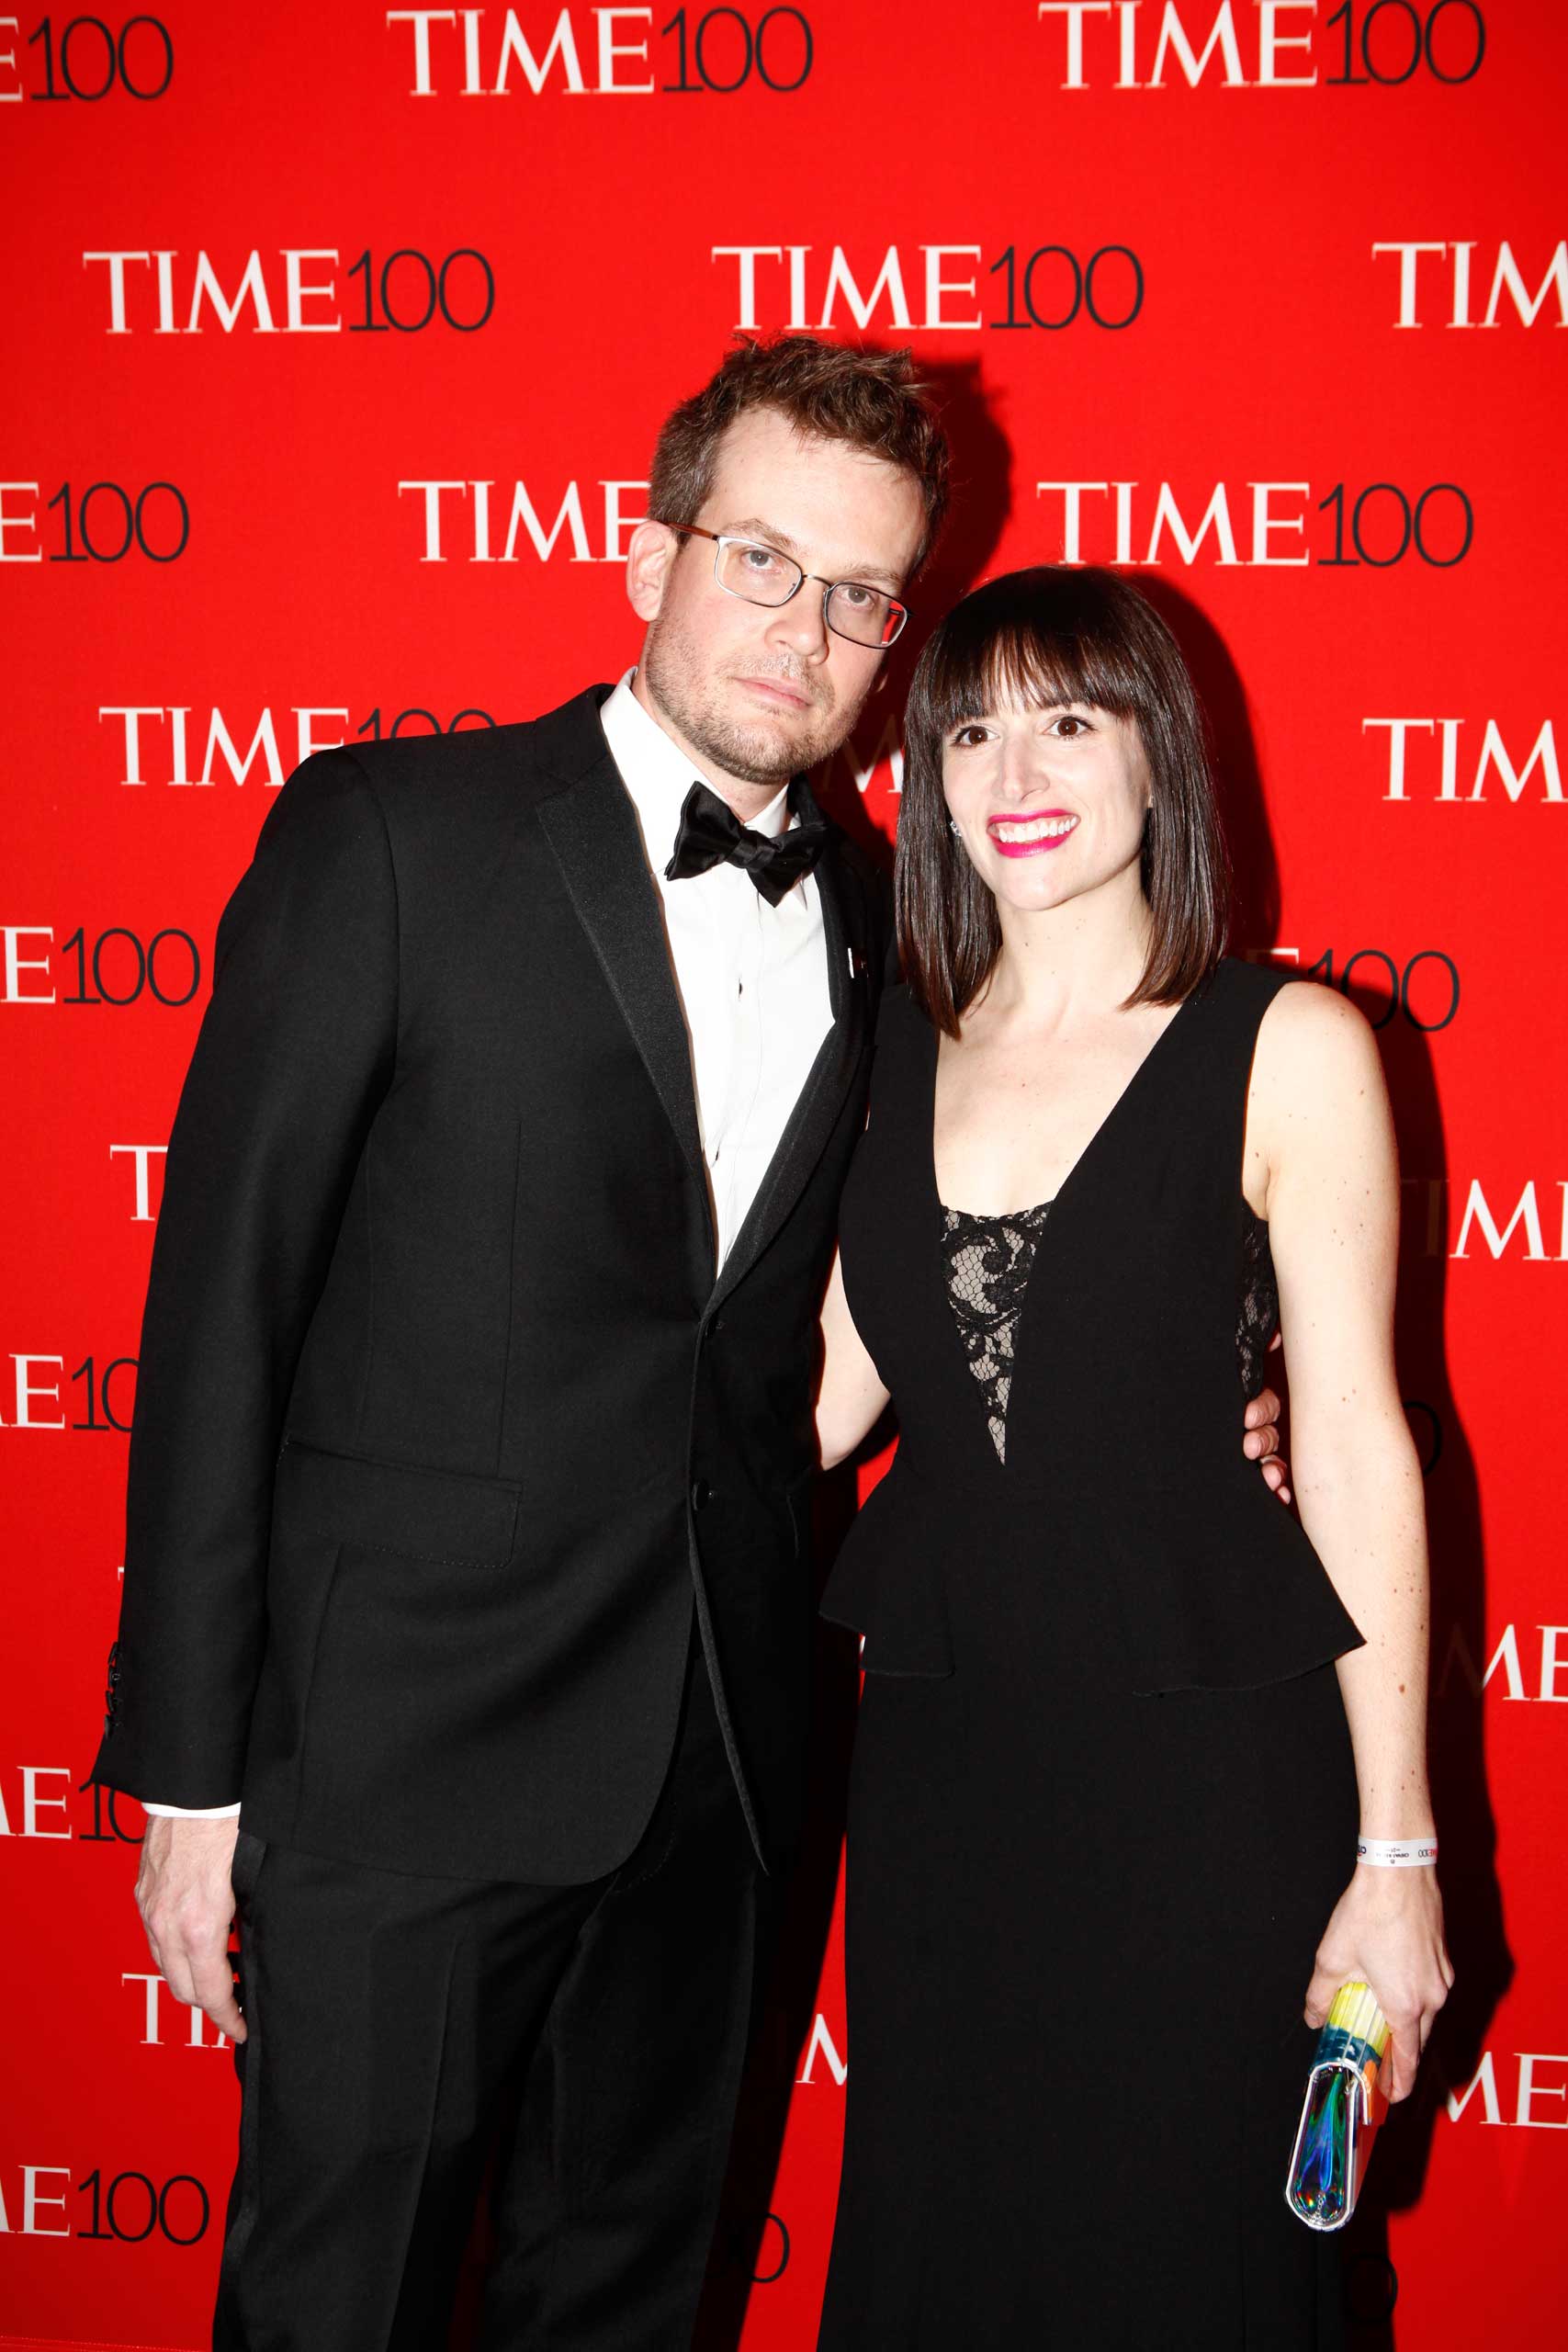 John Green and Sarah Urist Green attend the TIME 100 Gala at Jazz at Lincoln Center in New York City on Apr. 21, 2015.